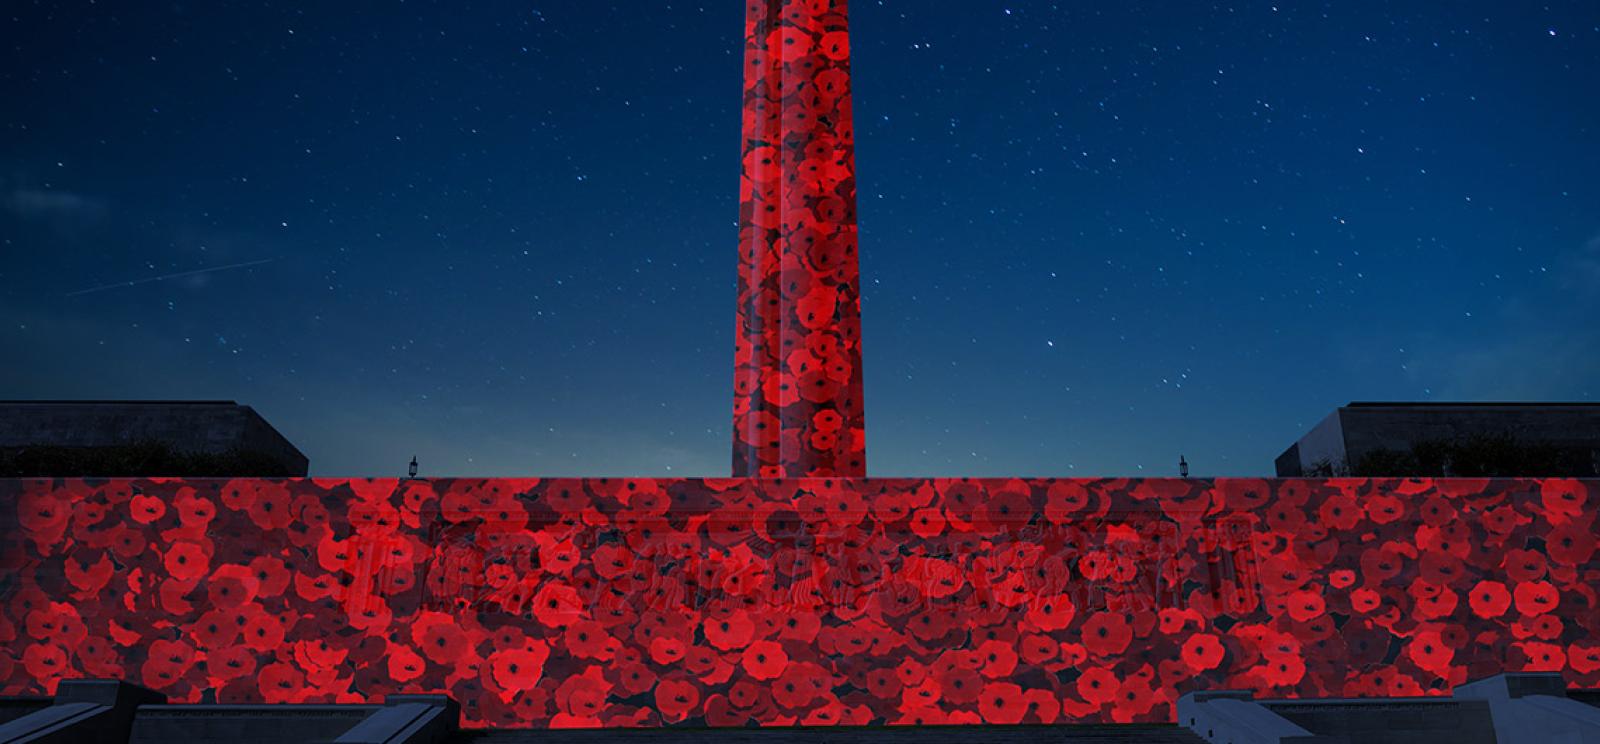 Concept illustration of poppy light projection on the Memorial